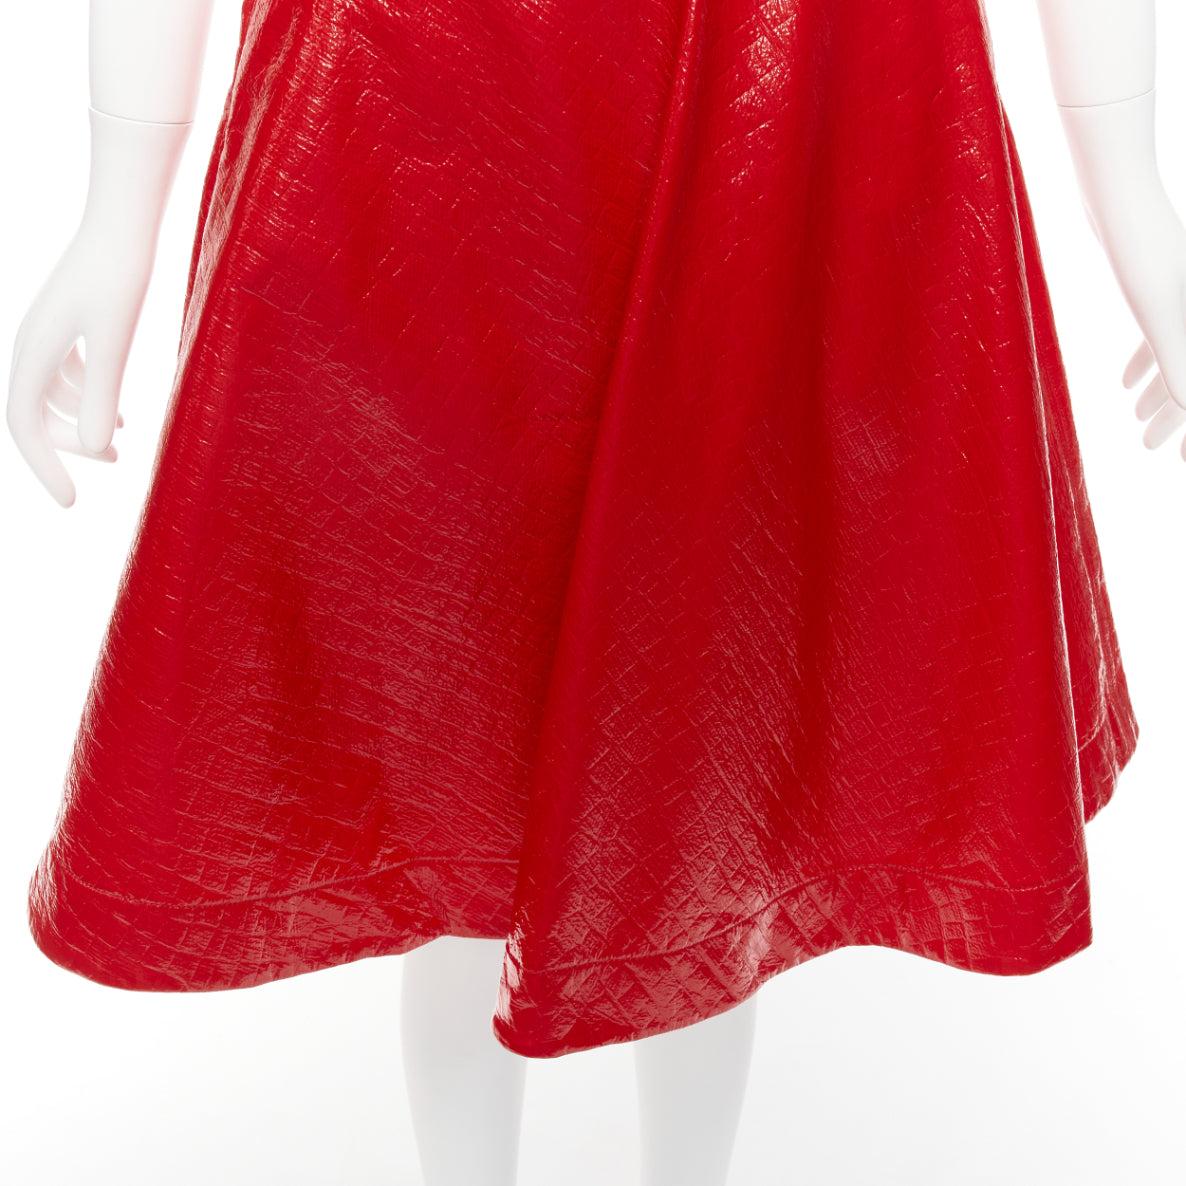 MSGM red faux patent high shine crinkled A-line flared skirt IT38 XS
Reference: AAWC/A00586
Brand: MSGM
Material: Cotton, Others
Color: Red
Pattern: Solid
Closure: Zip
Lining: Red Polyester
Extra Details: Side zip closure. Dual side pockets.
Made